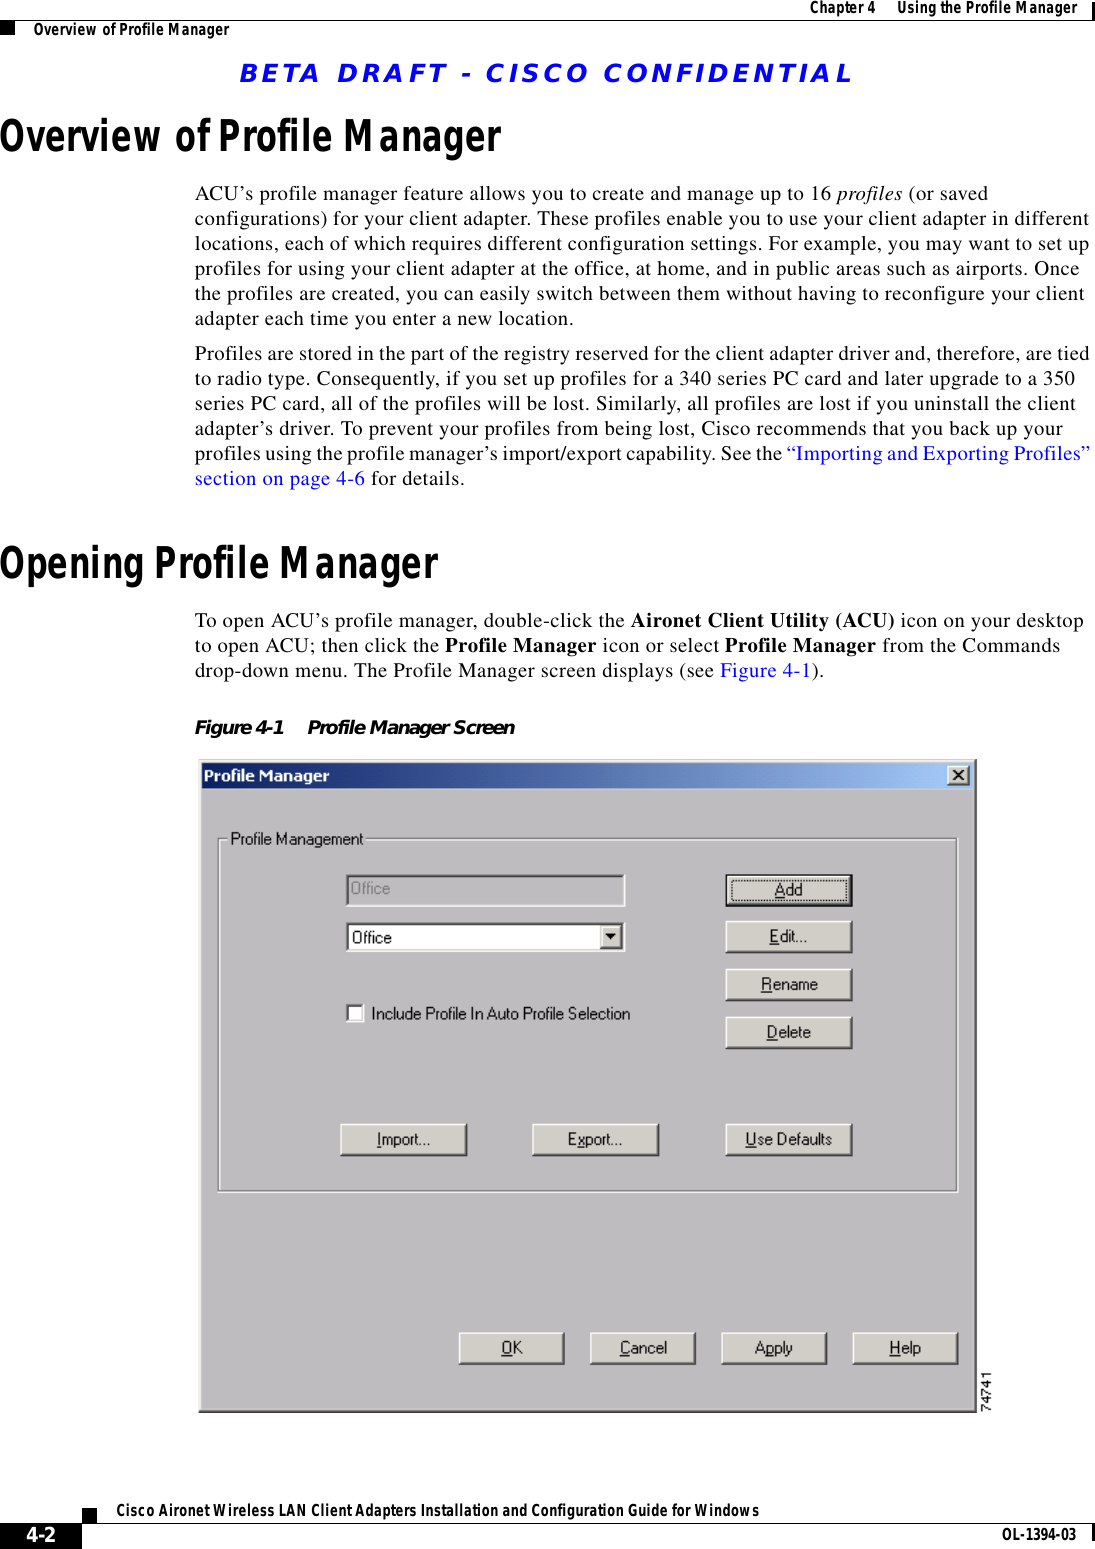 BETA DRAFT - CISCO CONFIDENTIAL4-2Cisco Aironet Wireless LAN Client Adapters Installation and Configuration Guide for Windows OL-1394-03Chapter 4      Using the Profile ManagerOverview of Profile ManagerOverview of Profile ManagerACU’s profile manager feature allows you to create and manage up to 16 profiles (or saved configurations) for your client adapter. These profiles enable you to use your client adapter in different locations, each of which requires different configuration settings. For example, you may want to set up profiles for using your client adapter at the office, at home, and in public areas such as airports. Once the profiles are created, you can easily switch between them without having to reconfigure your client adapter each time you enter a new location.Profiles are stored in the part of the registry reserved for the client adapter driver and, therefore, are tied to radio type. Consequently, if you set up profiles for a 340 series PC card and later upgrade to a 350 series PC card, all of the profiles will be lost. Similarly, all profiles are lost if you uninstall the client adapter’s driver. To prevent your profiles from being lost, Cisco recommends that you back up your profiles using the profile manager’s import/export capability. See the “Importing and Exporting Profiles” section on page 4-6 for details.Opening Profile ManagerTo open ACU’s profile manager, double-click the Aironet Client Utility (ACU) icon on your desktop to open ACU; then click the Profile Manager icon or select Profile Manager from the Commands drop-down menu. The Profile Manager screen displays (see Figure 4-1).Figure 4-1 Profile Manager Screen